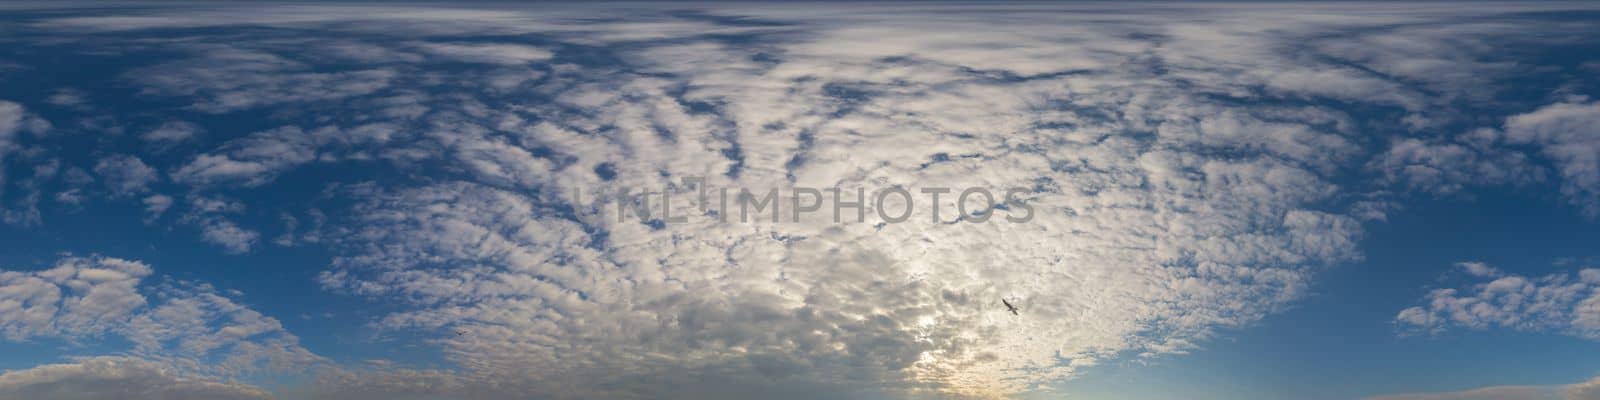 Panorama of a dark blue sunset sky with golden Cumulus clouds. Seamless hdr 360 panorama in spherical equiangular format. Full zenith for 3D visualization, sky replacement for aerial drone panoramas. by Matiunina